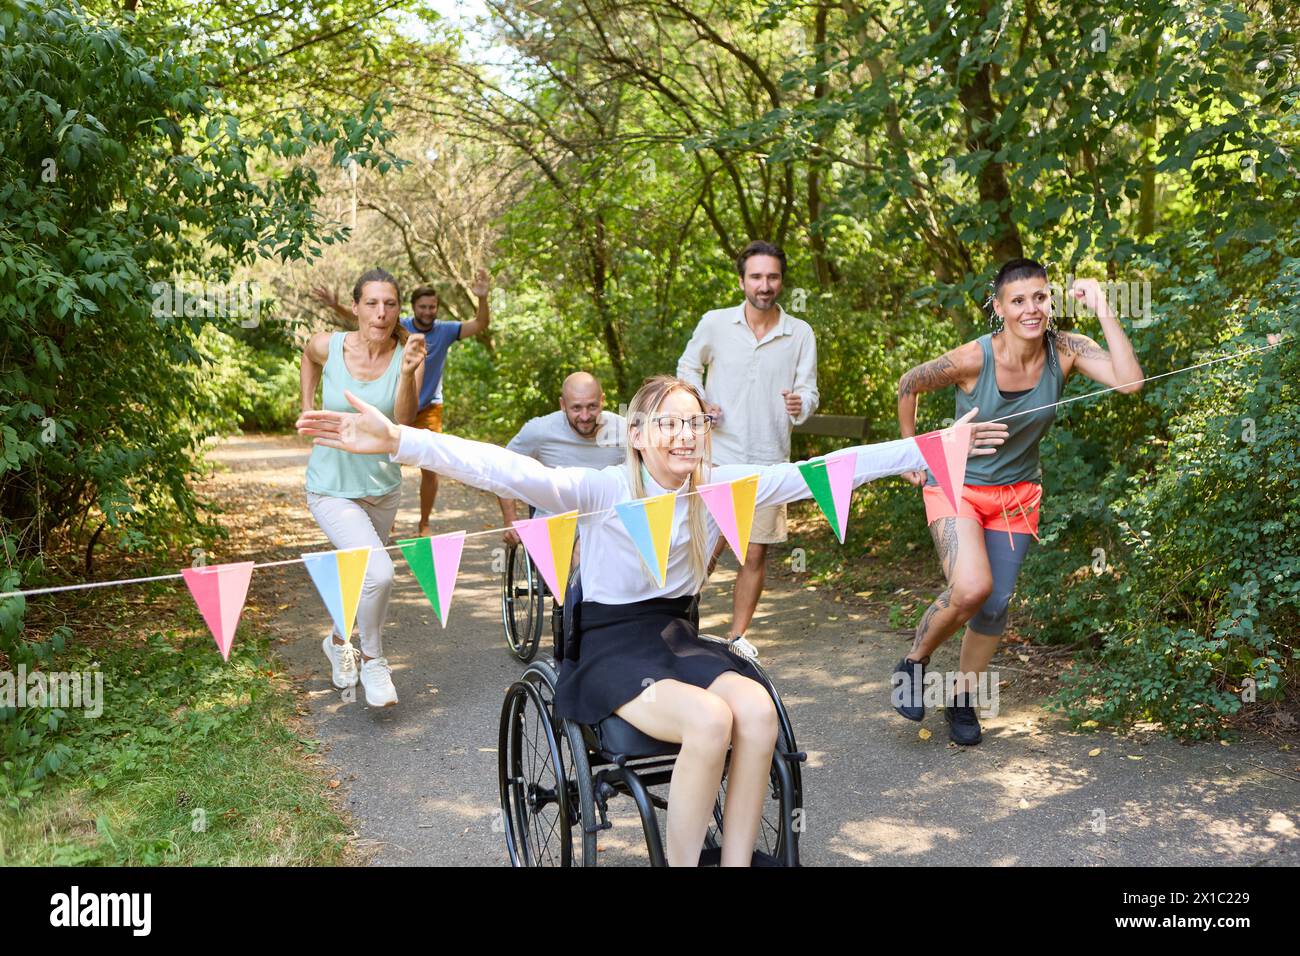 An inclusive outdoor event capturing a joyful race where a woman in a wheelchair competes with friends, embodying teamwork and diversity. Stock Photo